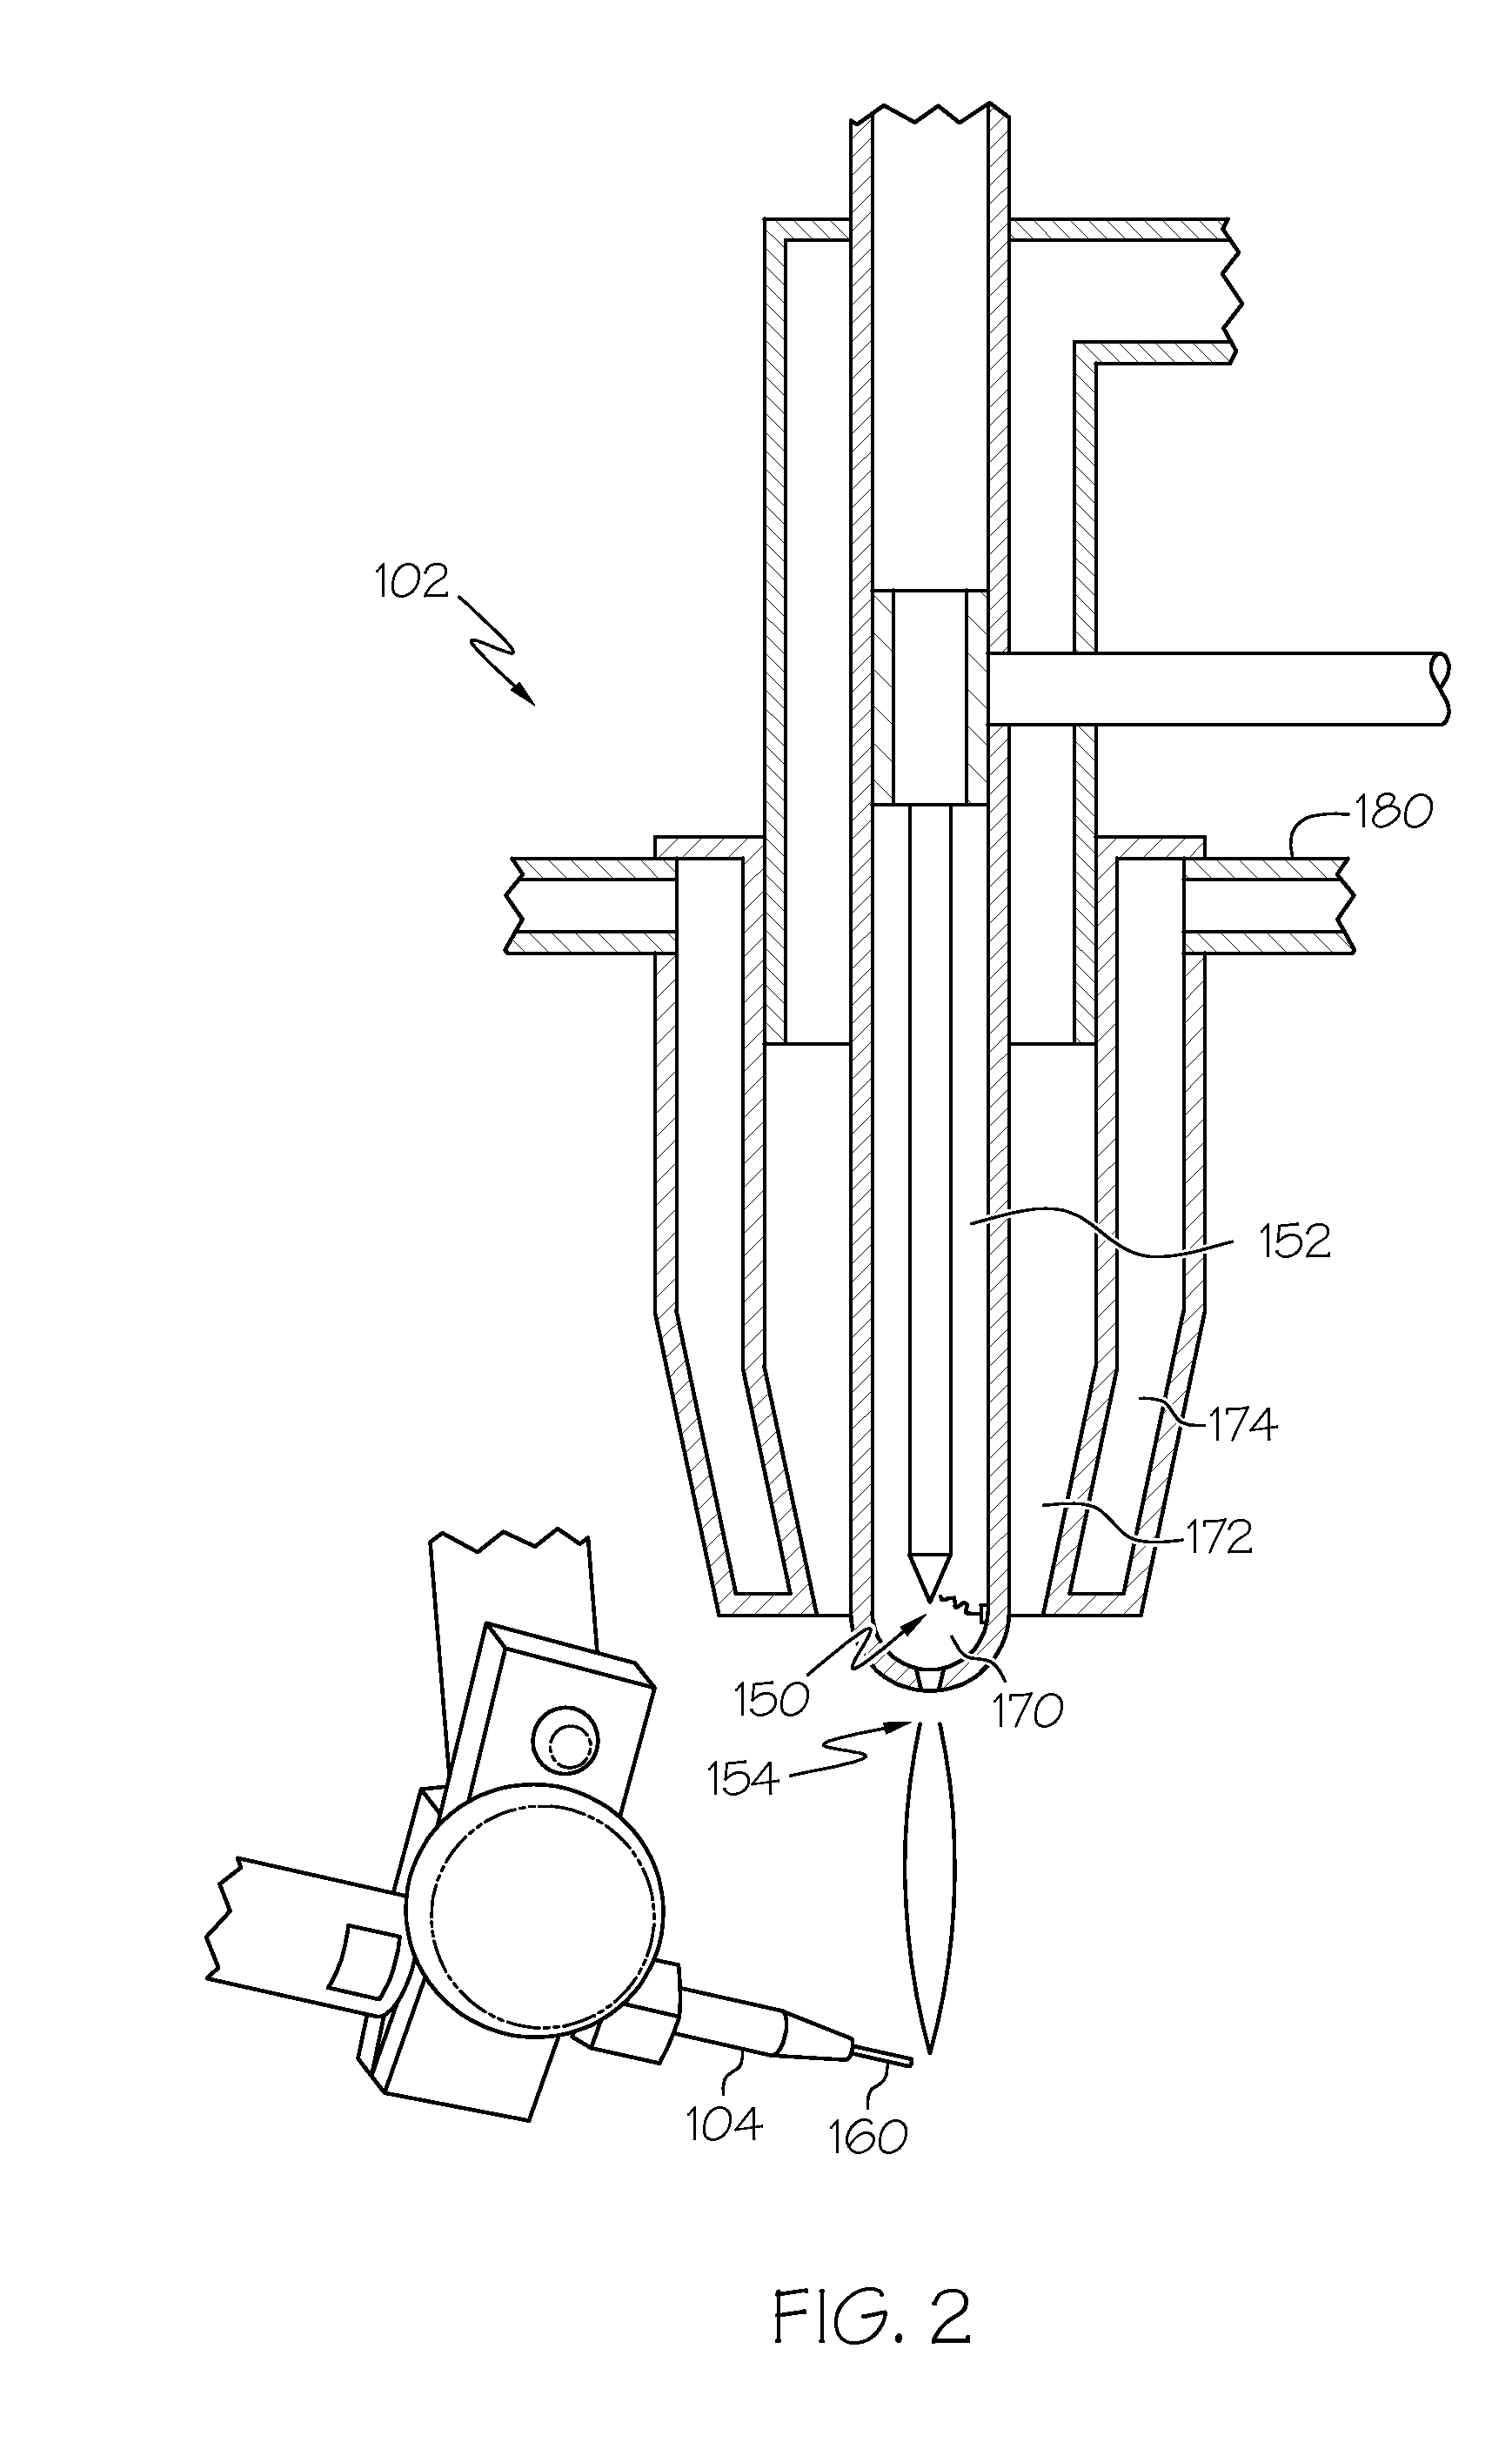 Deposition of materials with low ductility using solid free-form fabrication